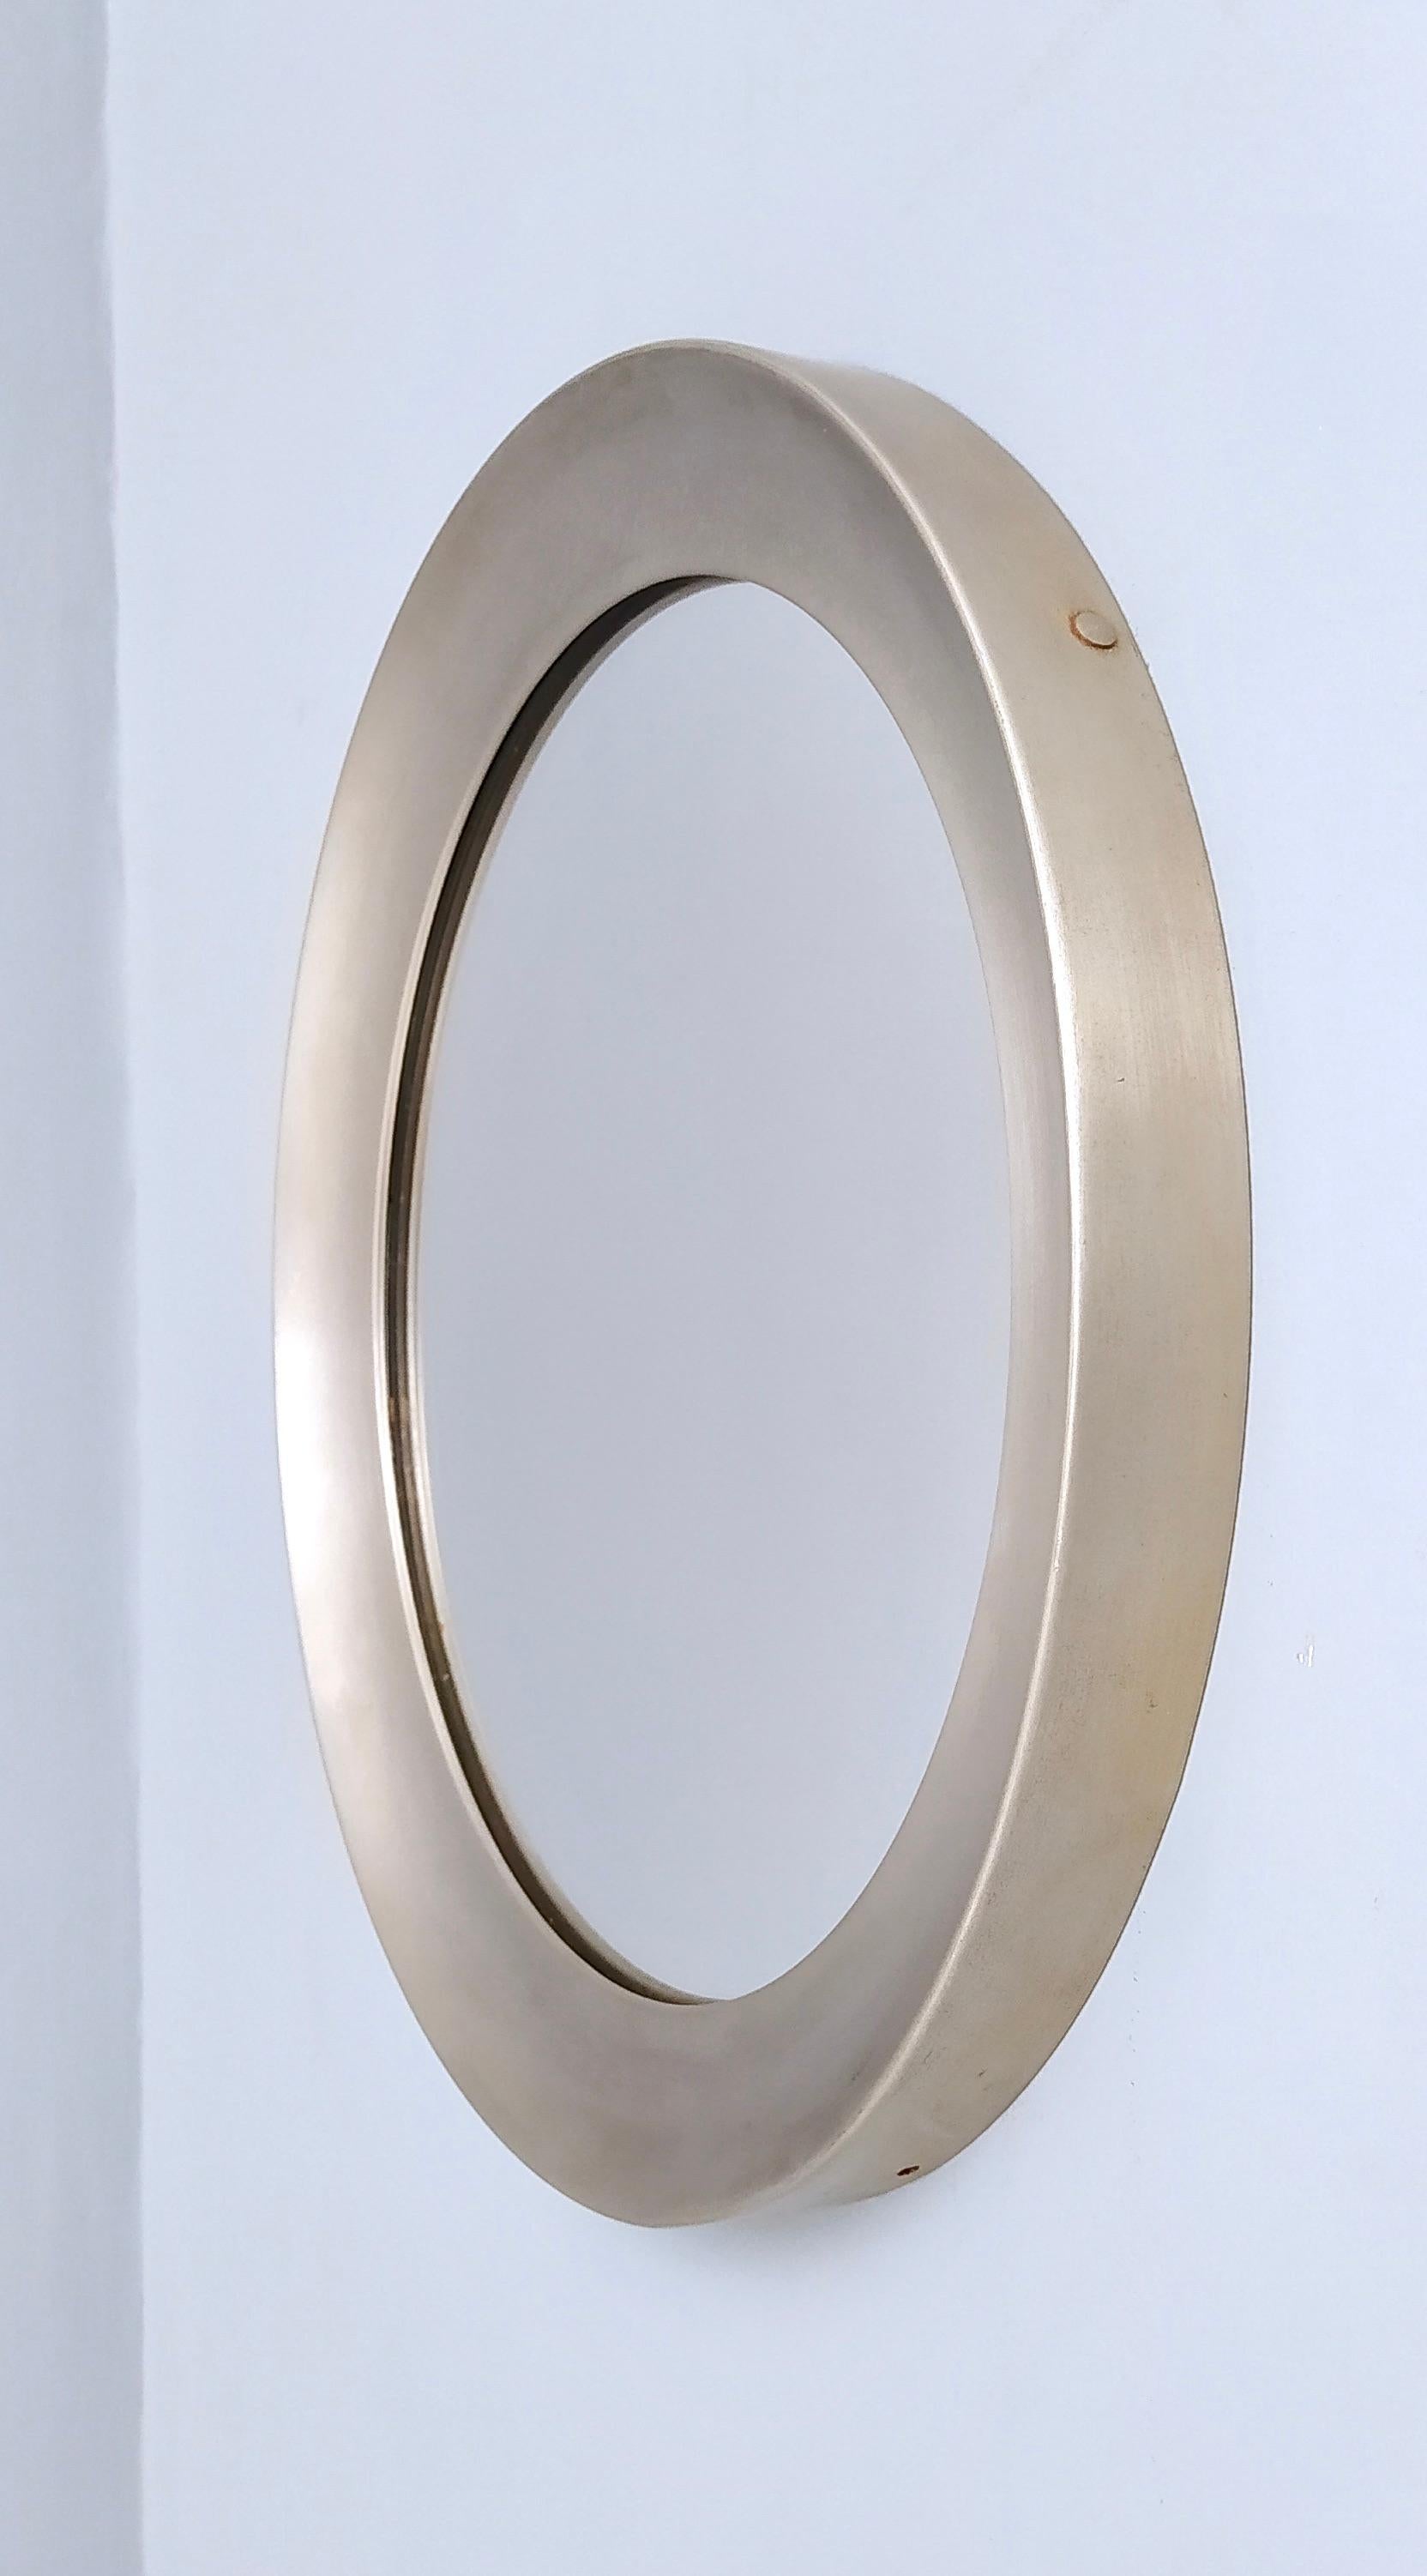 Mid-20th Century Vintage Round Narciso Mirror with Steel Frame by S. Mazza for Artemide, Italy For Sale